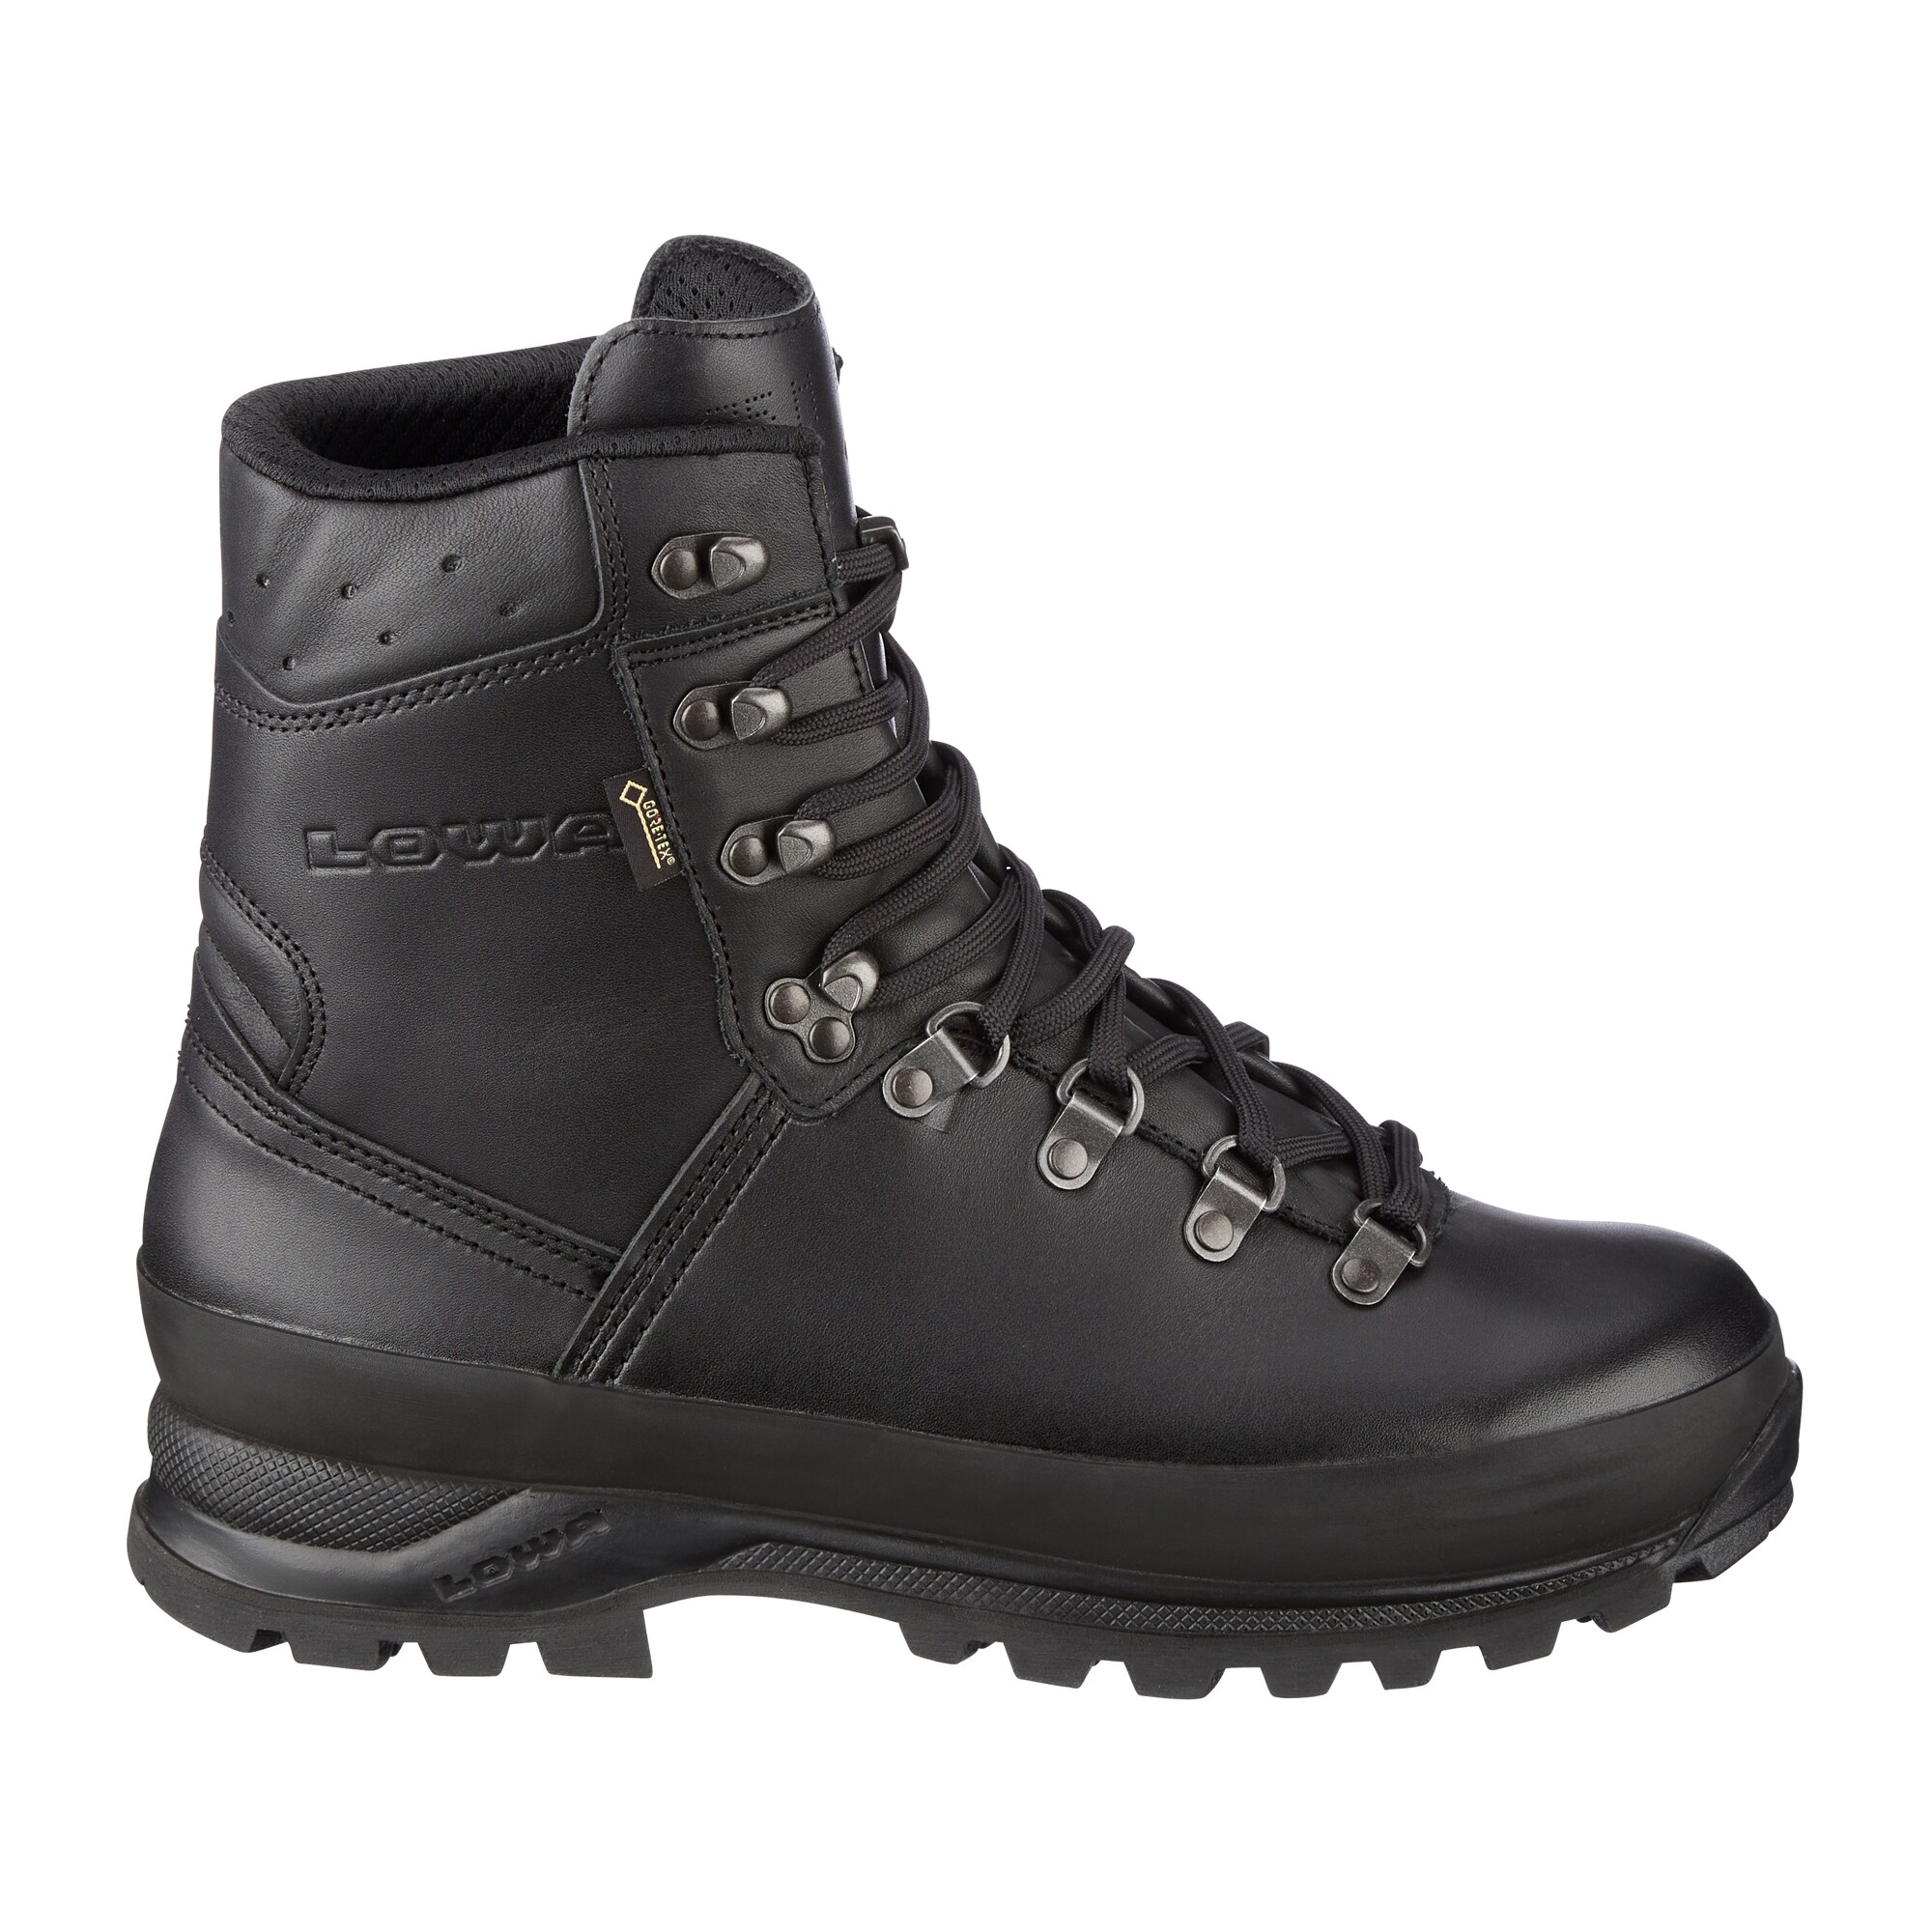 Purchase the LOWA Boots Mountain GTX by ASMC